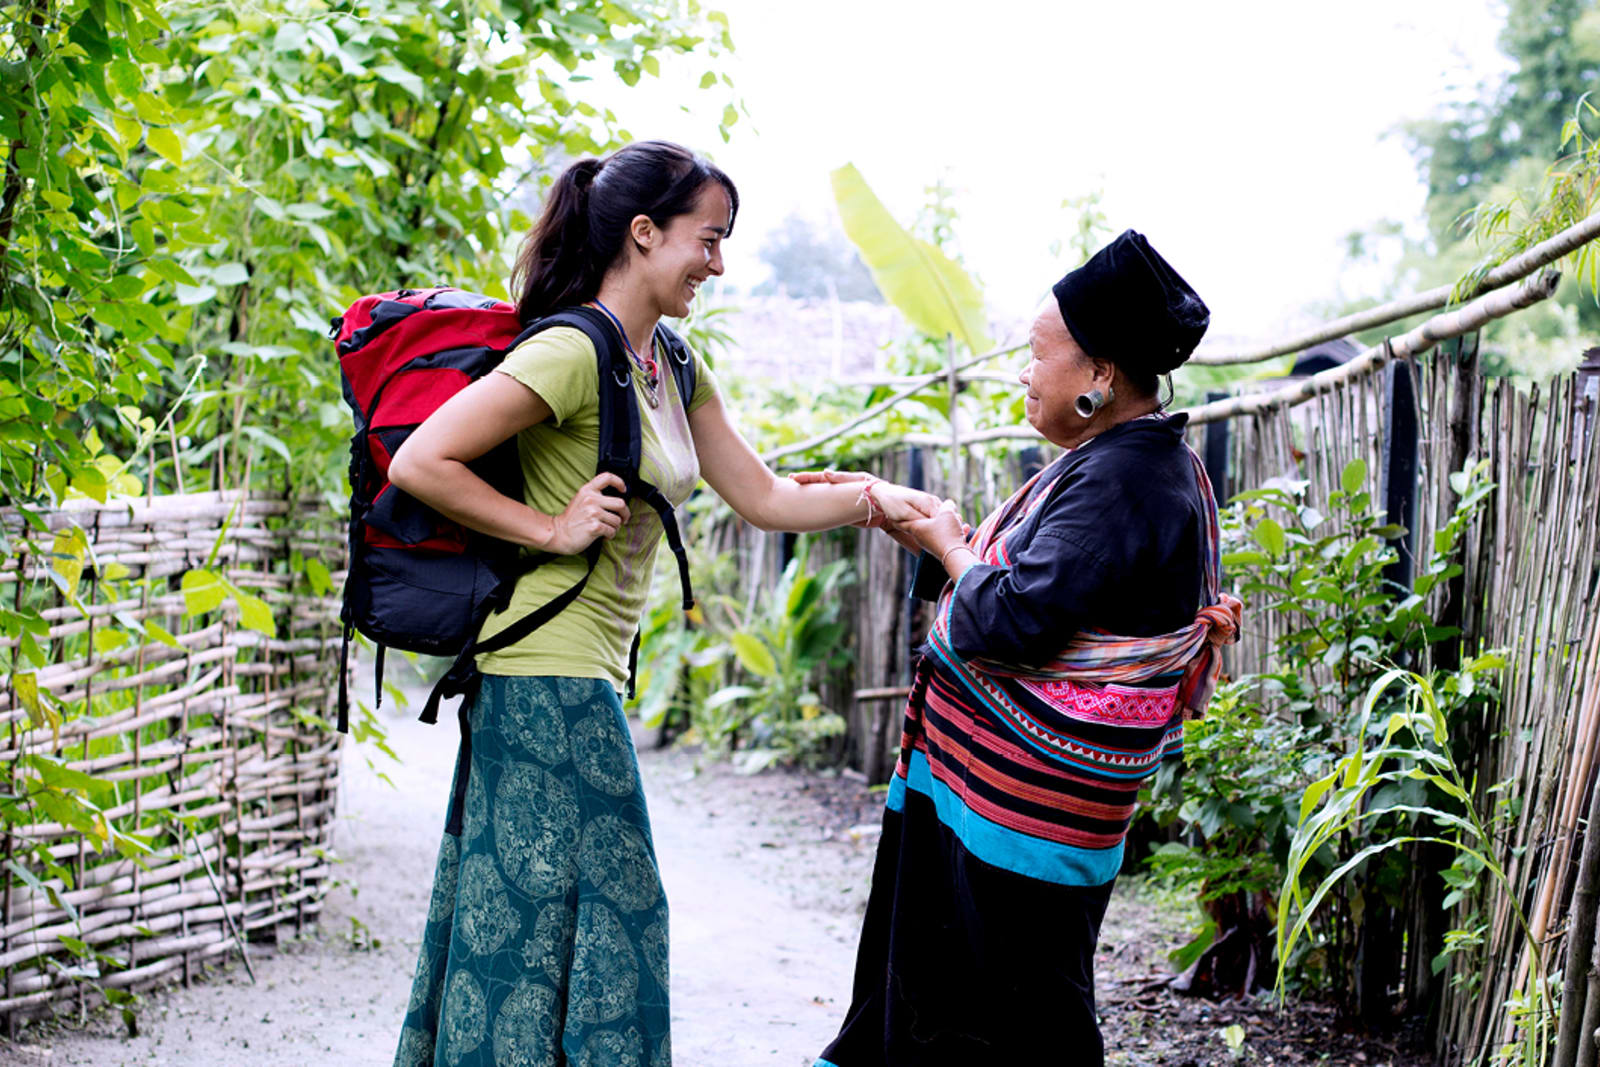 A travellers meets with a member of a local community during a volunteer trip